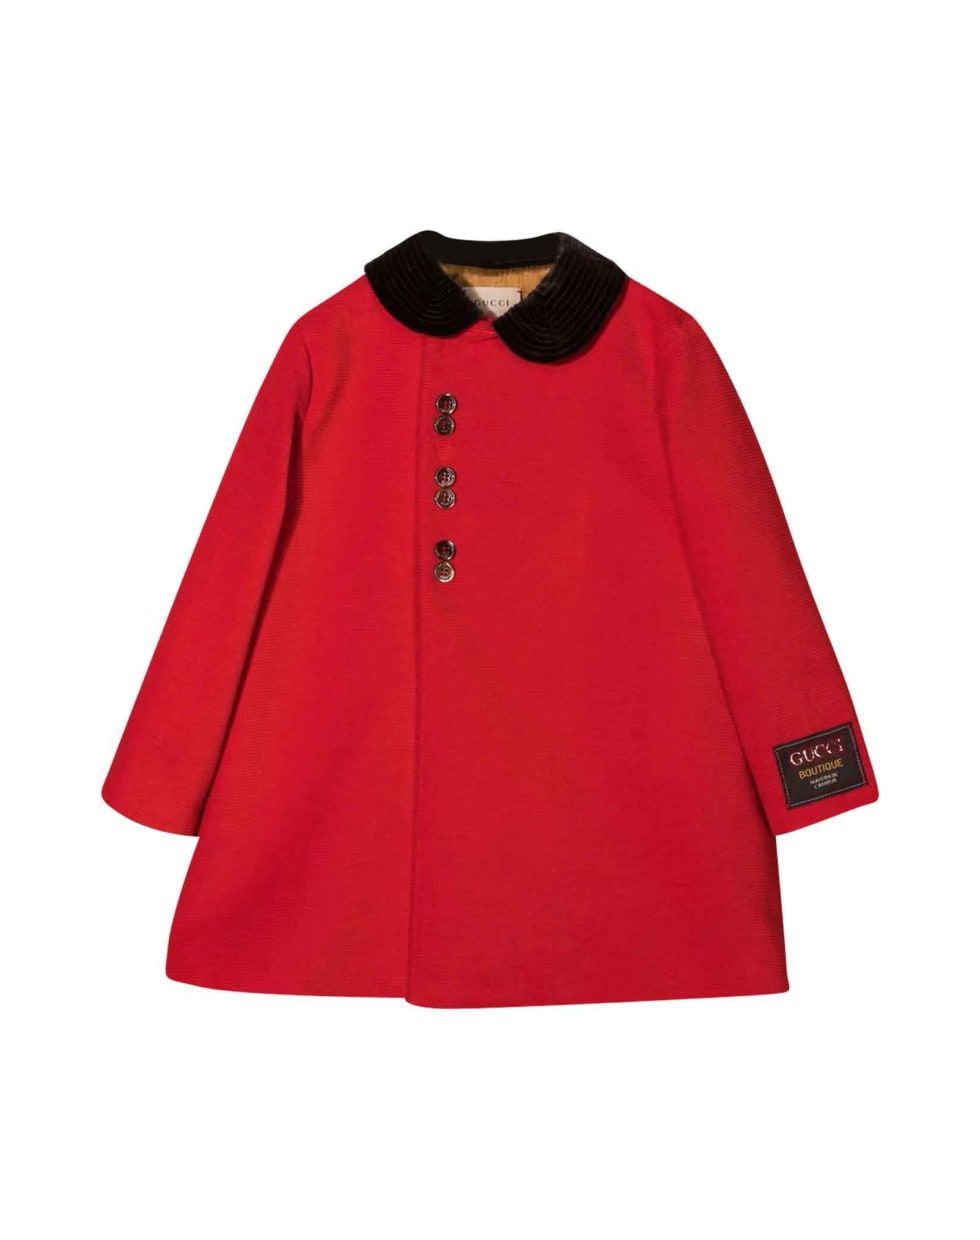 Gucci Red Coat With Frontal Decentralized Button Closure - Rosso